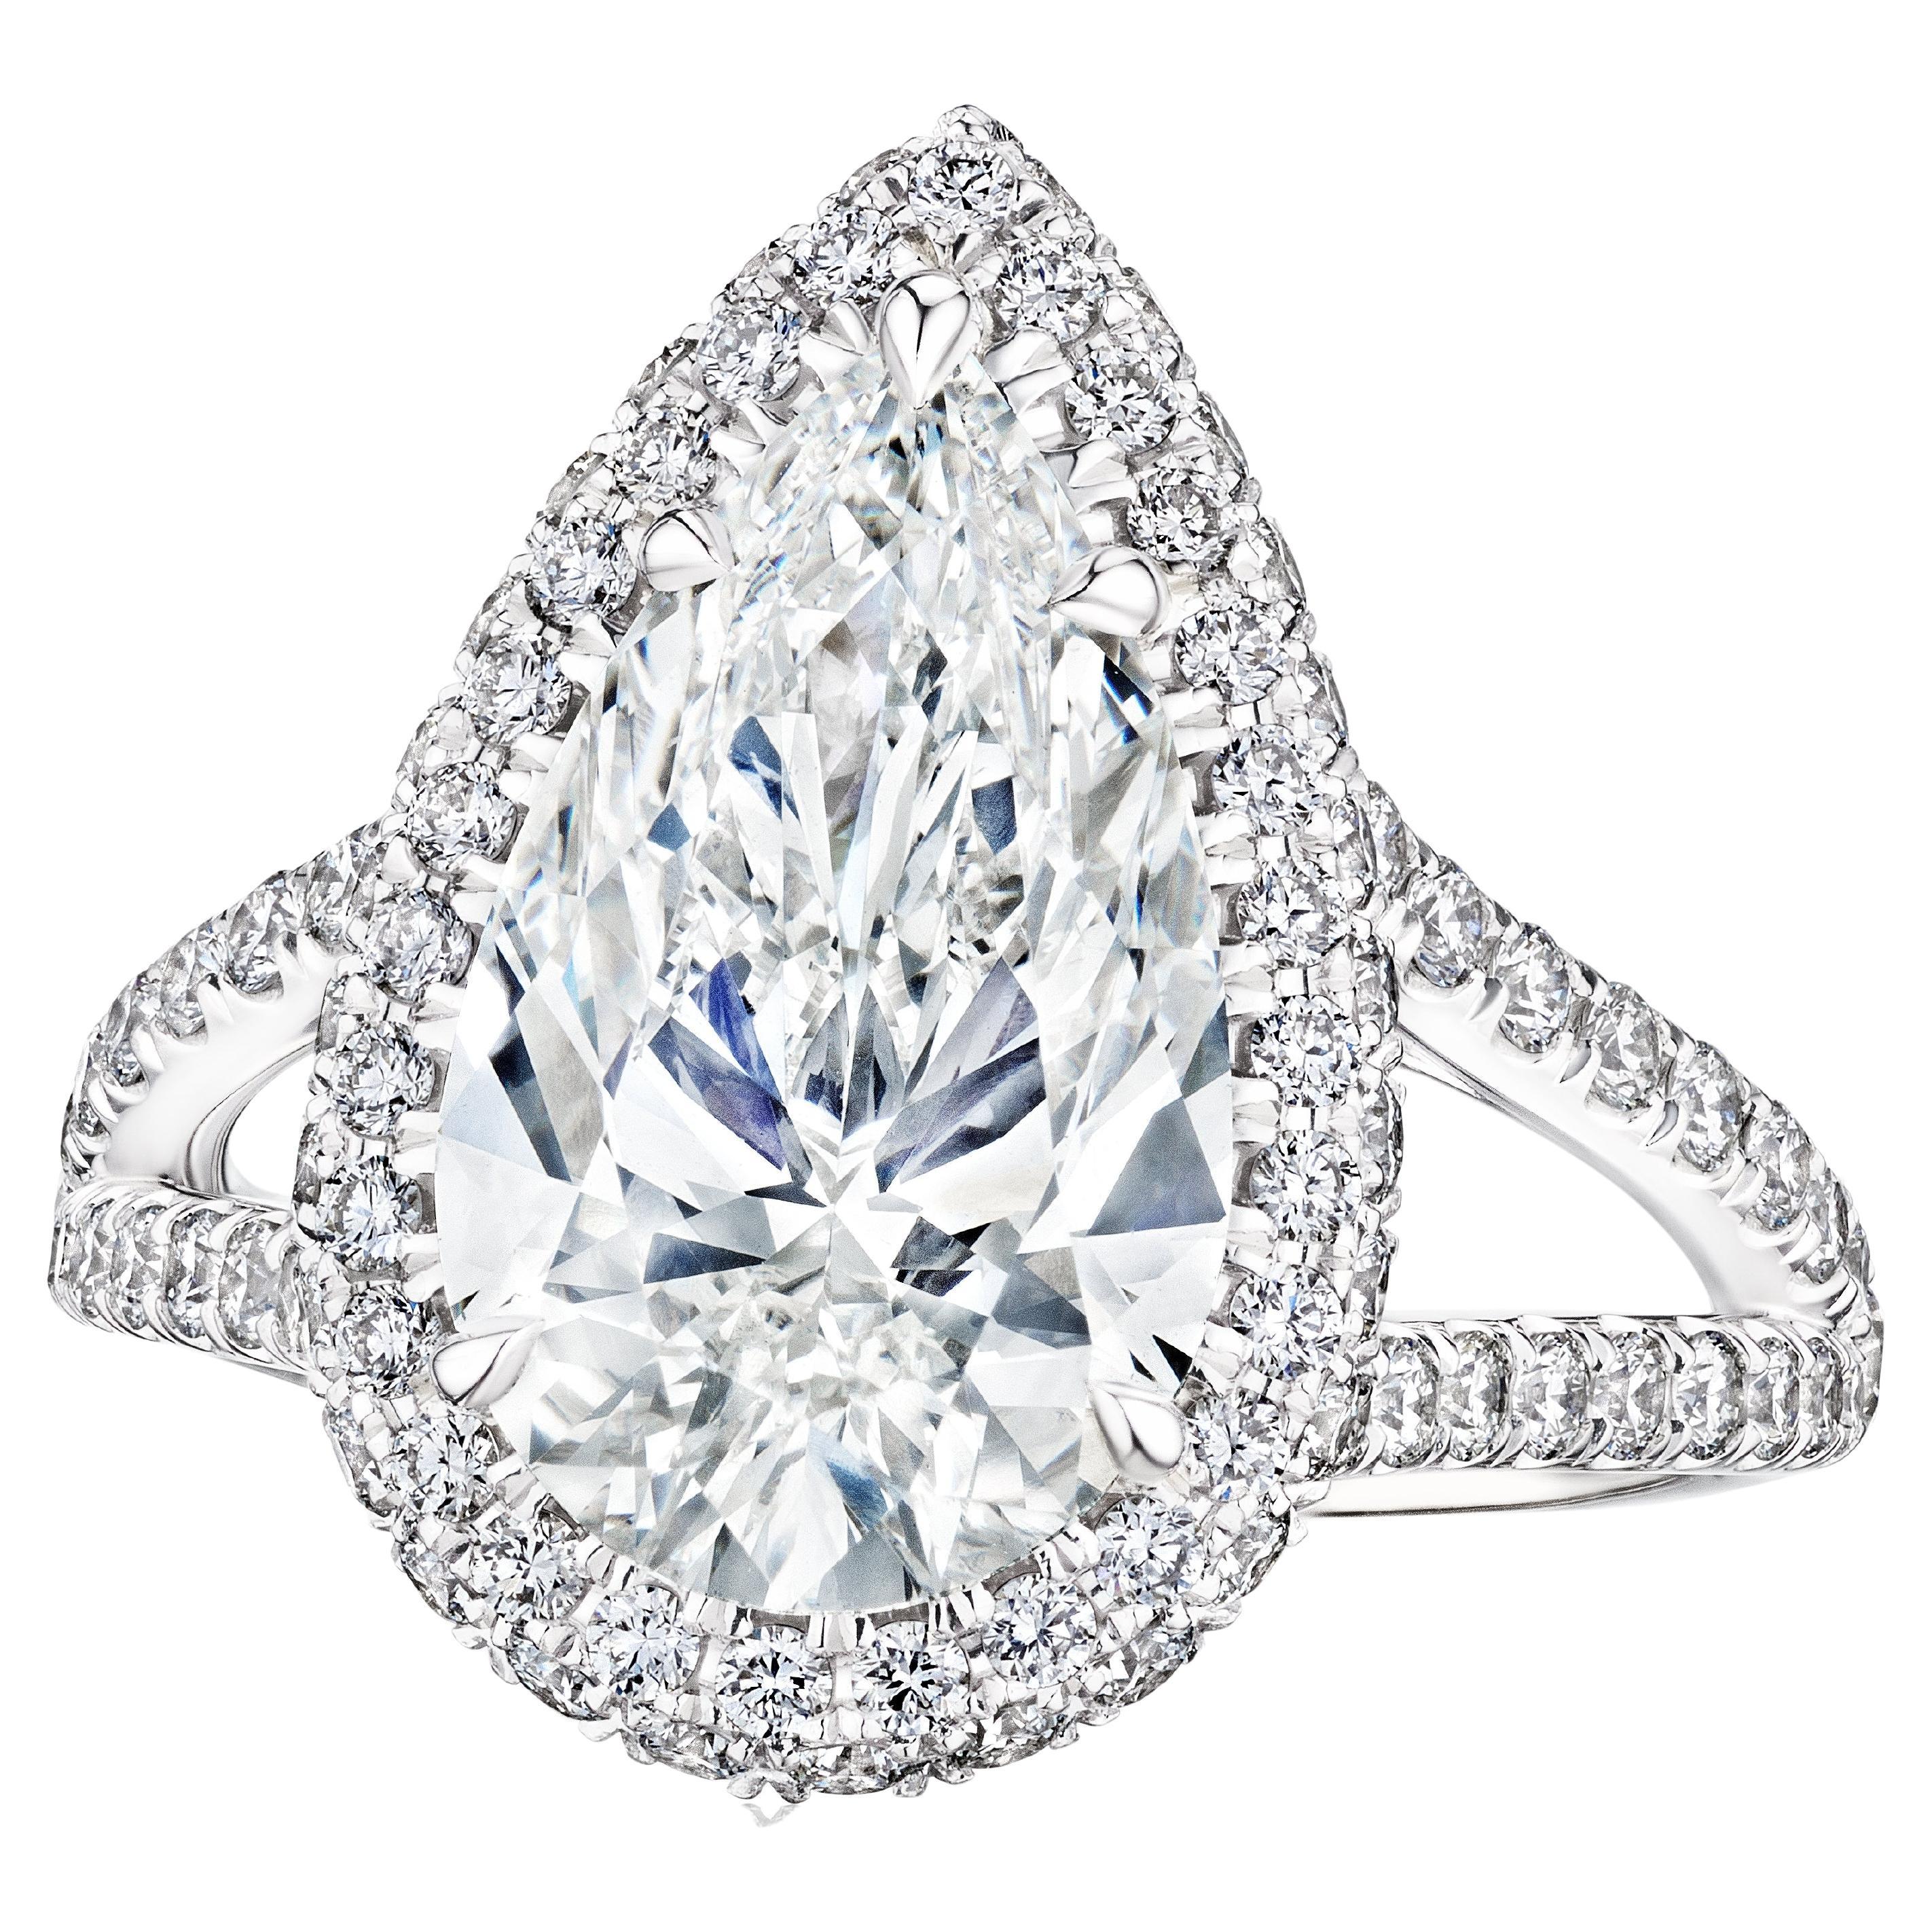 GIA Certified 3.50 Carat E SI1 Pear Diamond Engagement Ring "Landress" For Sale